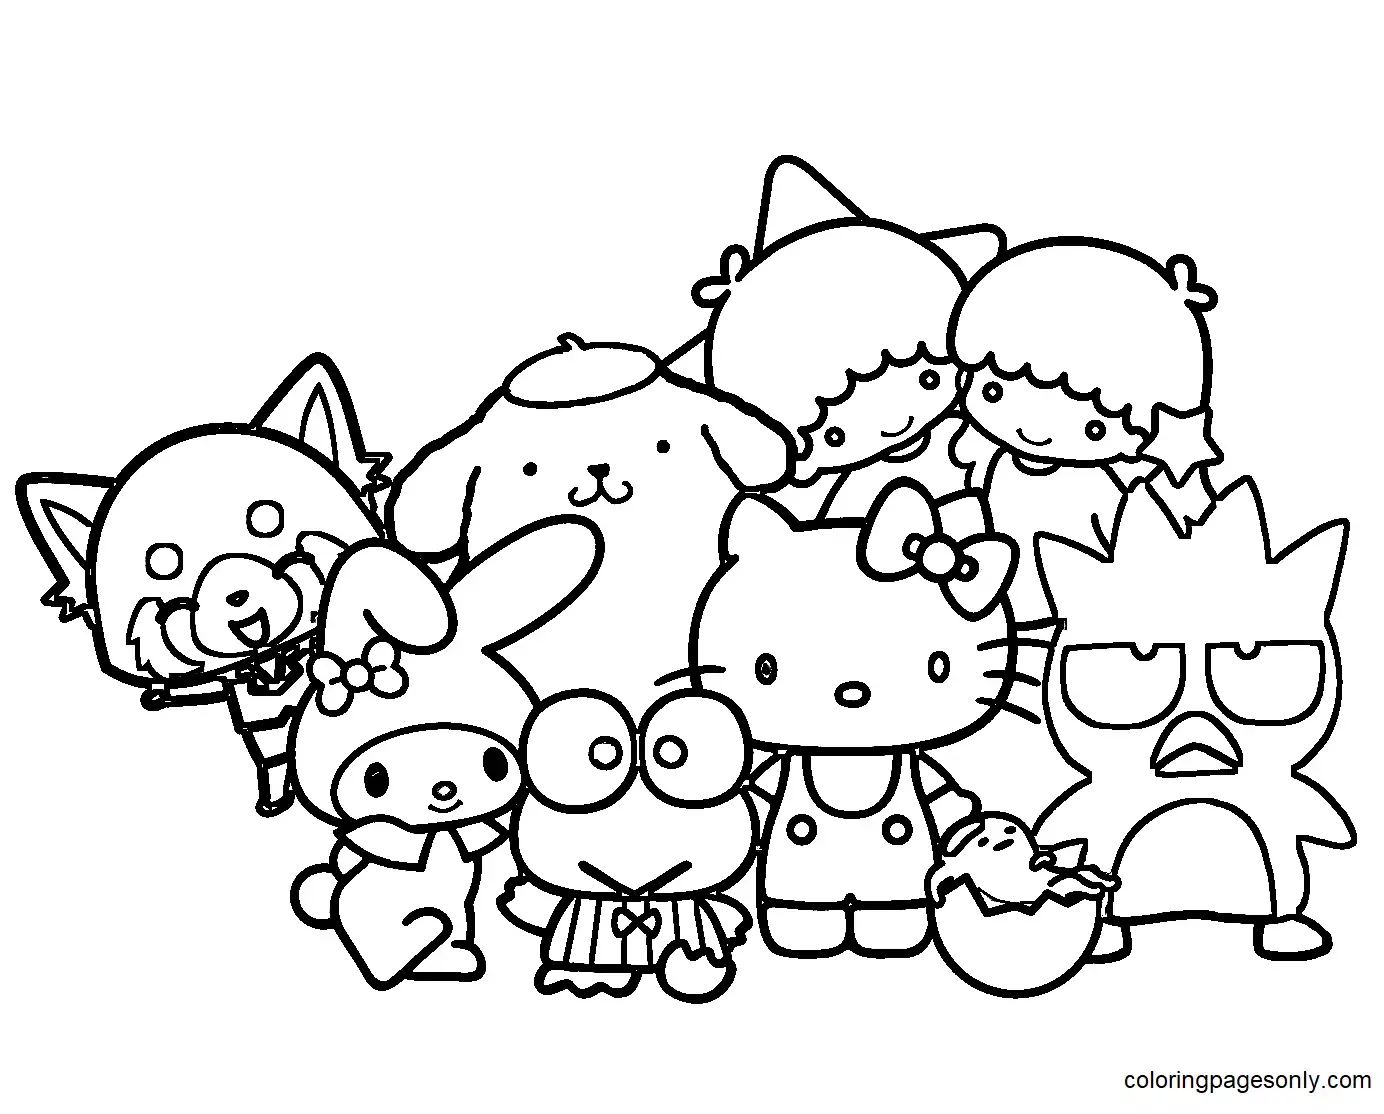 Sanrio characters coloring pages hello kitty colouring pages kitty coloring hello kitty coloring